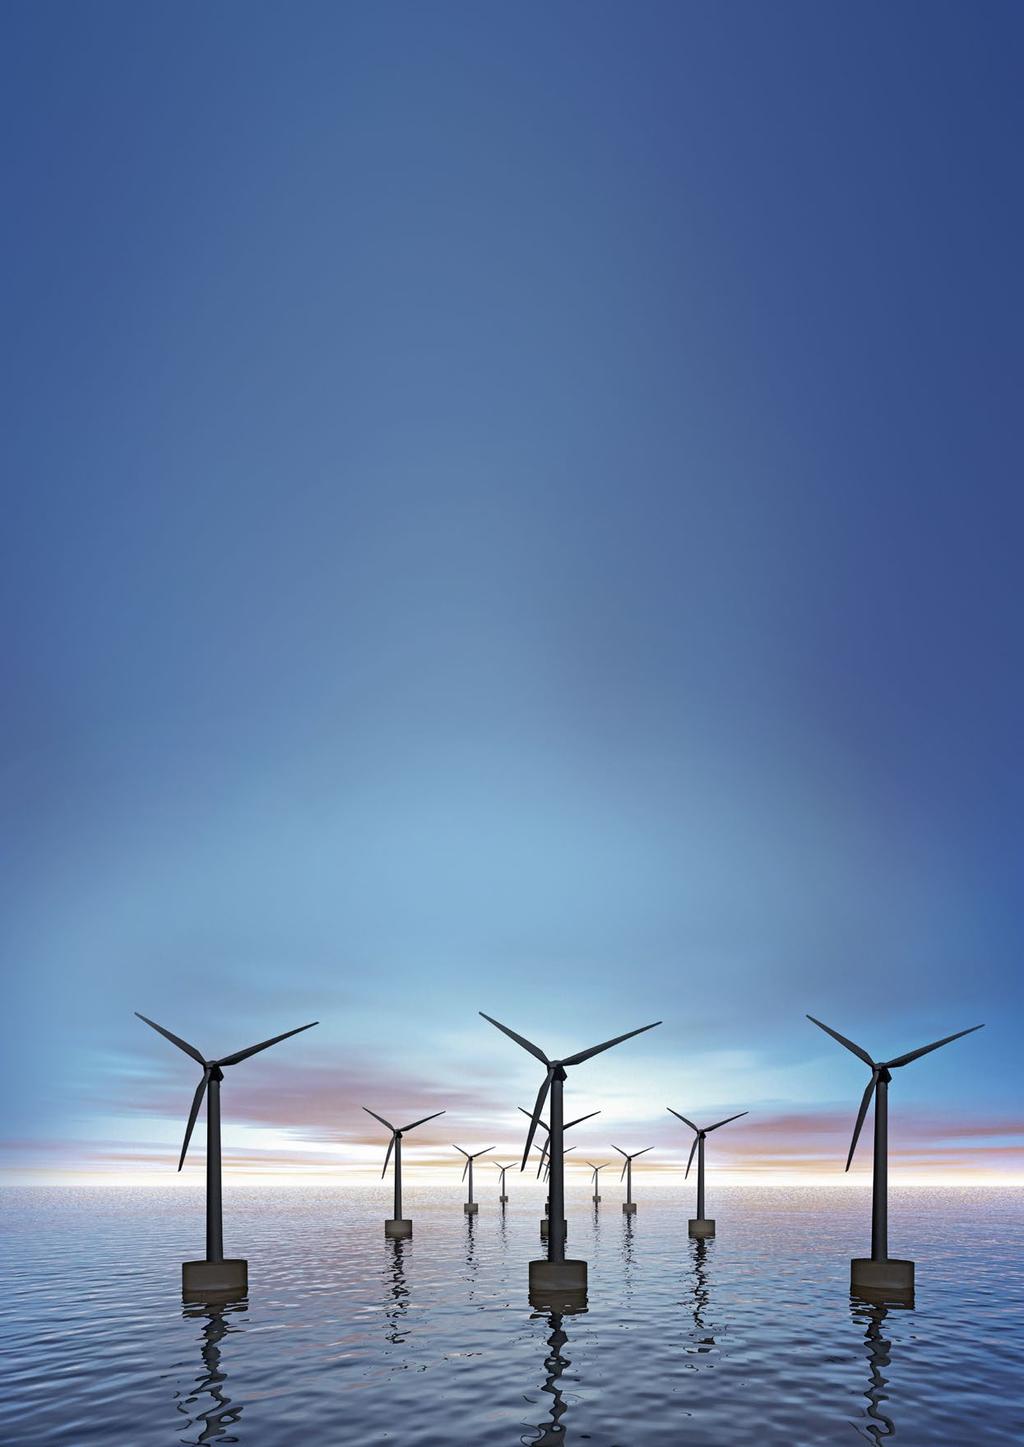 ABB WIND CONVERTERS, ACS880 WIND TURBINE CONVERTERS 3 Superior reliability Designed for extreme conditions Fast, precise control The ACS880 converter regulates active and reactive power output